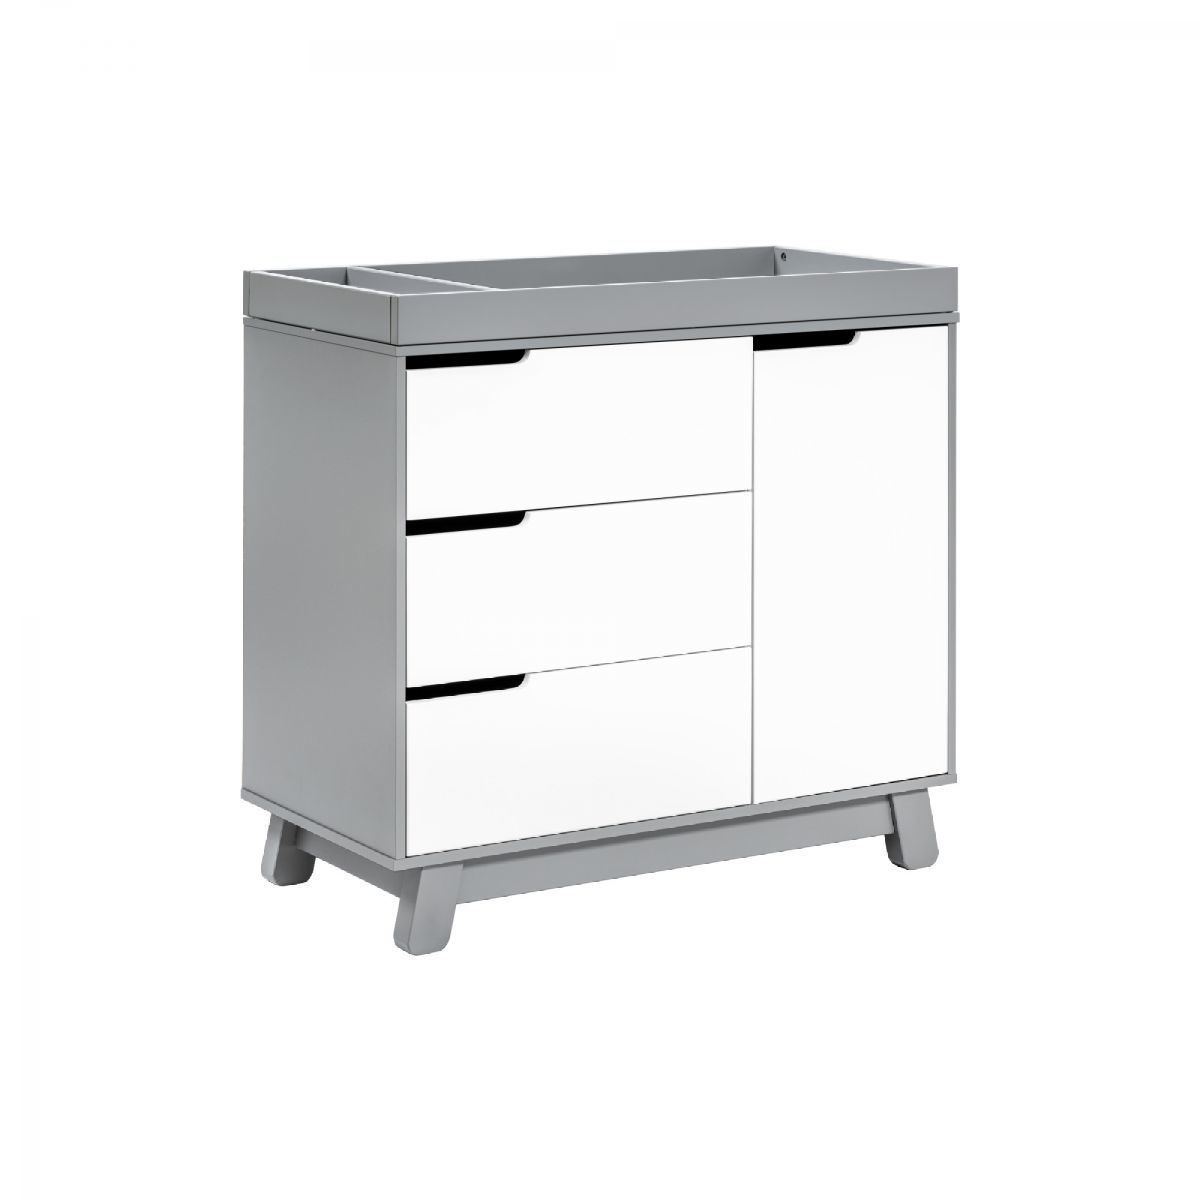 Hudson 3Drawer Changer Dresser with Removable Changing Tray by Babyletto